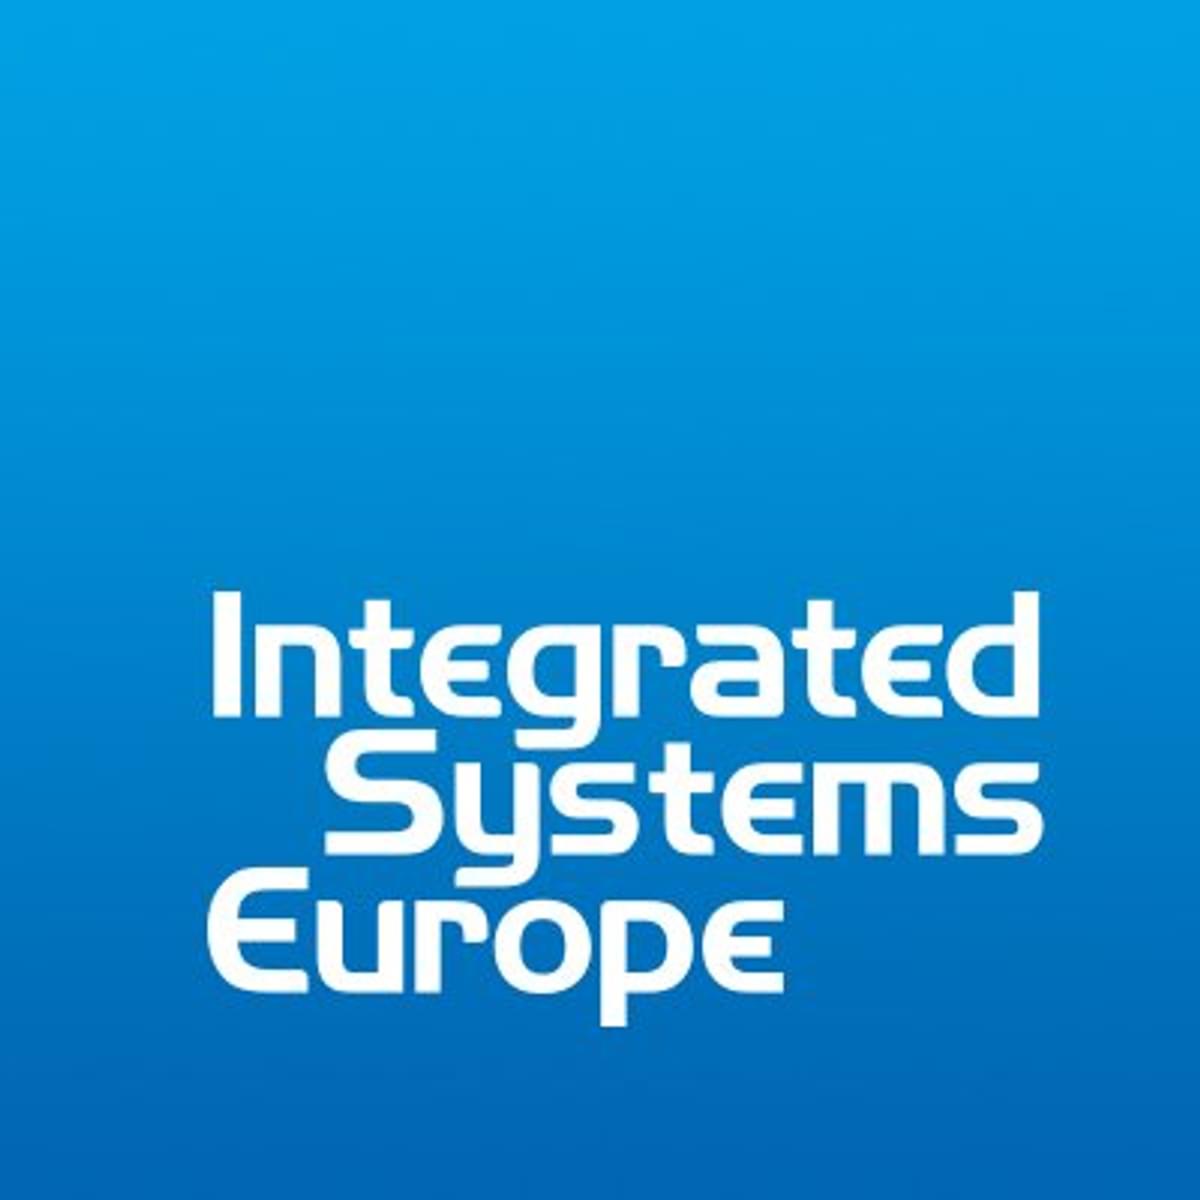 Integrated Systems Europe (ISE) 2019 van start in Amsterdam RAI image